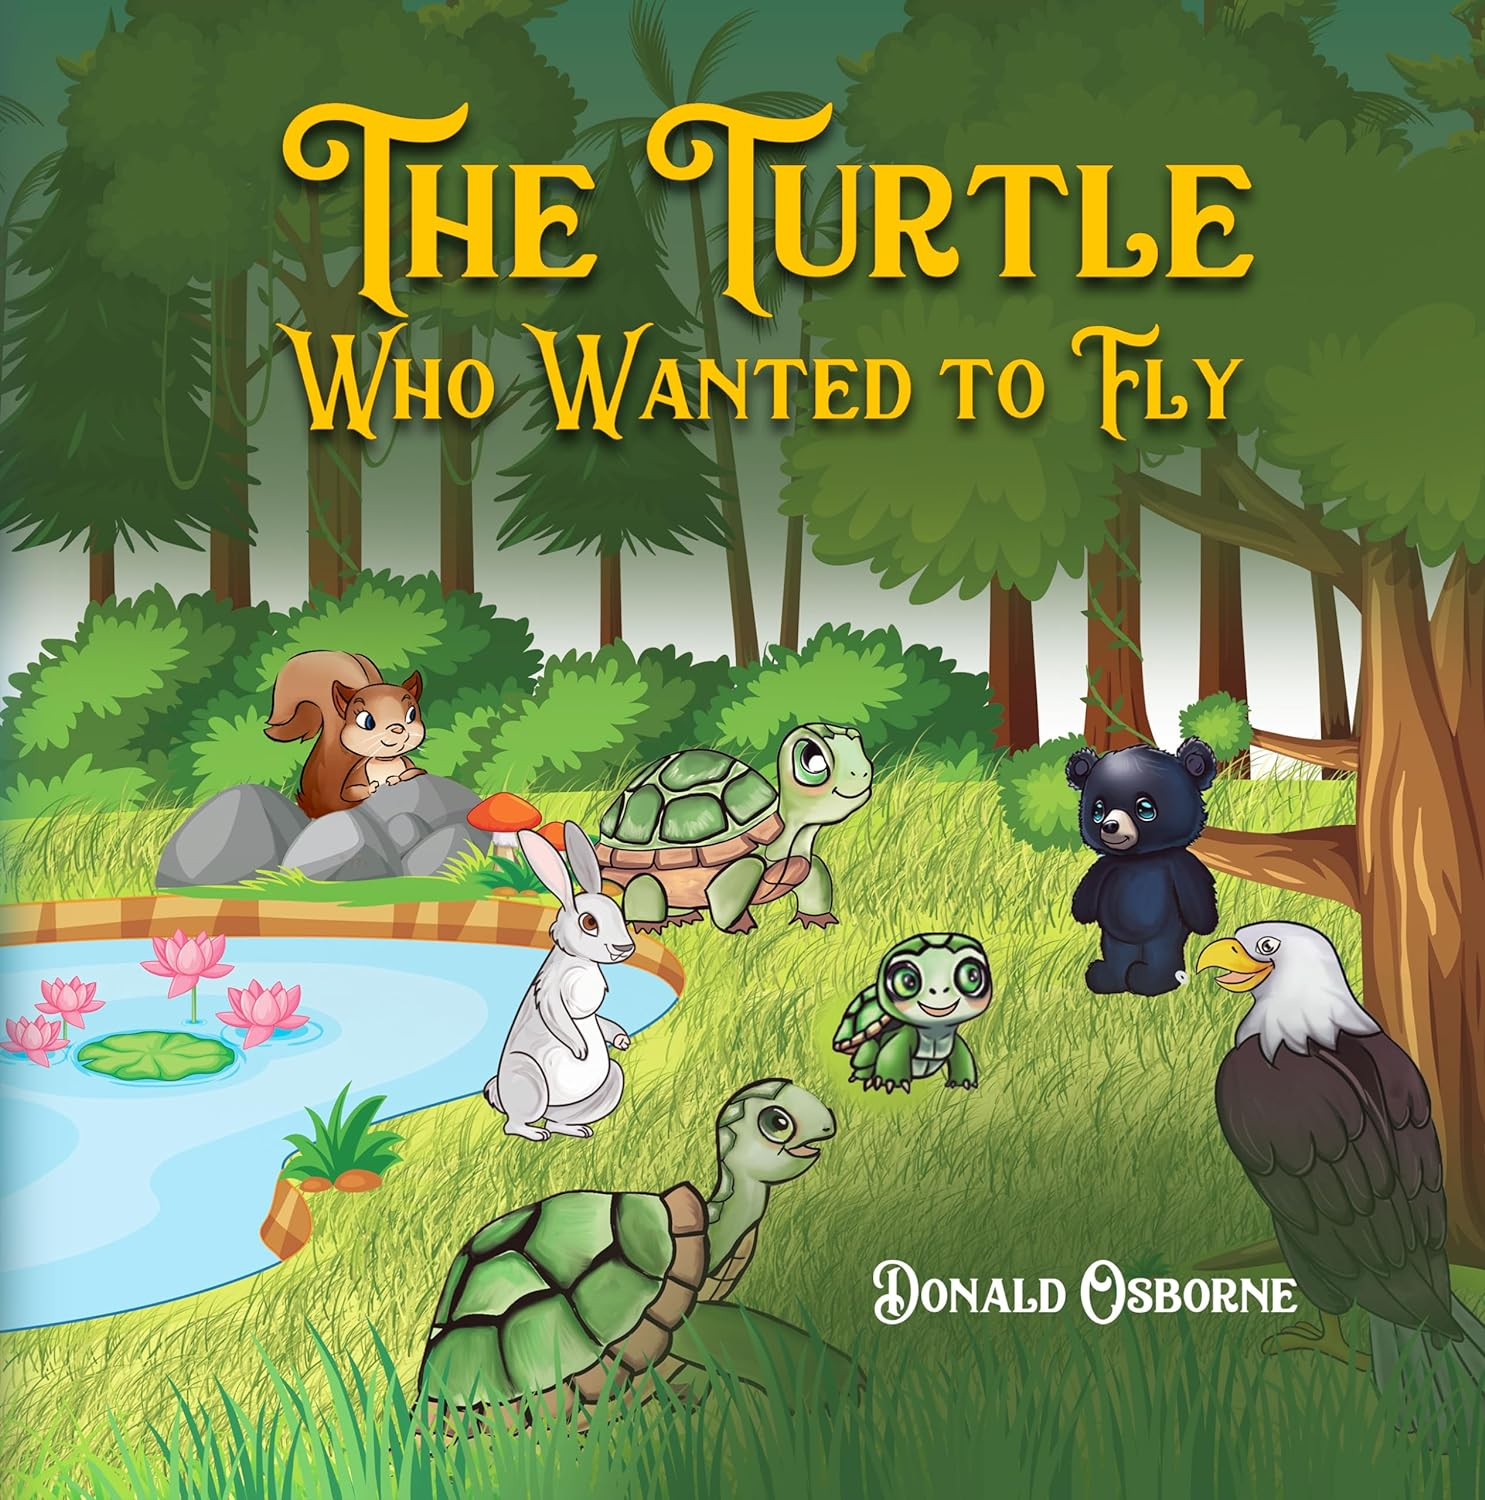 New Children's Book, "The Turtle Who Wanted to Fly," Takes Readers on a Heartwarming Journey of Friendship and Dreams